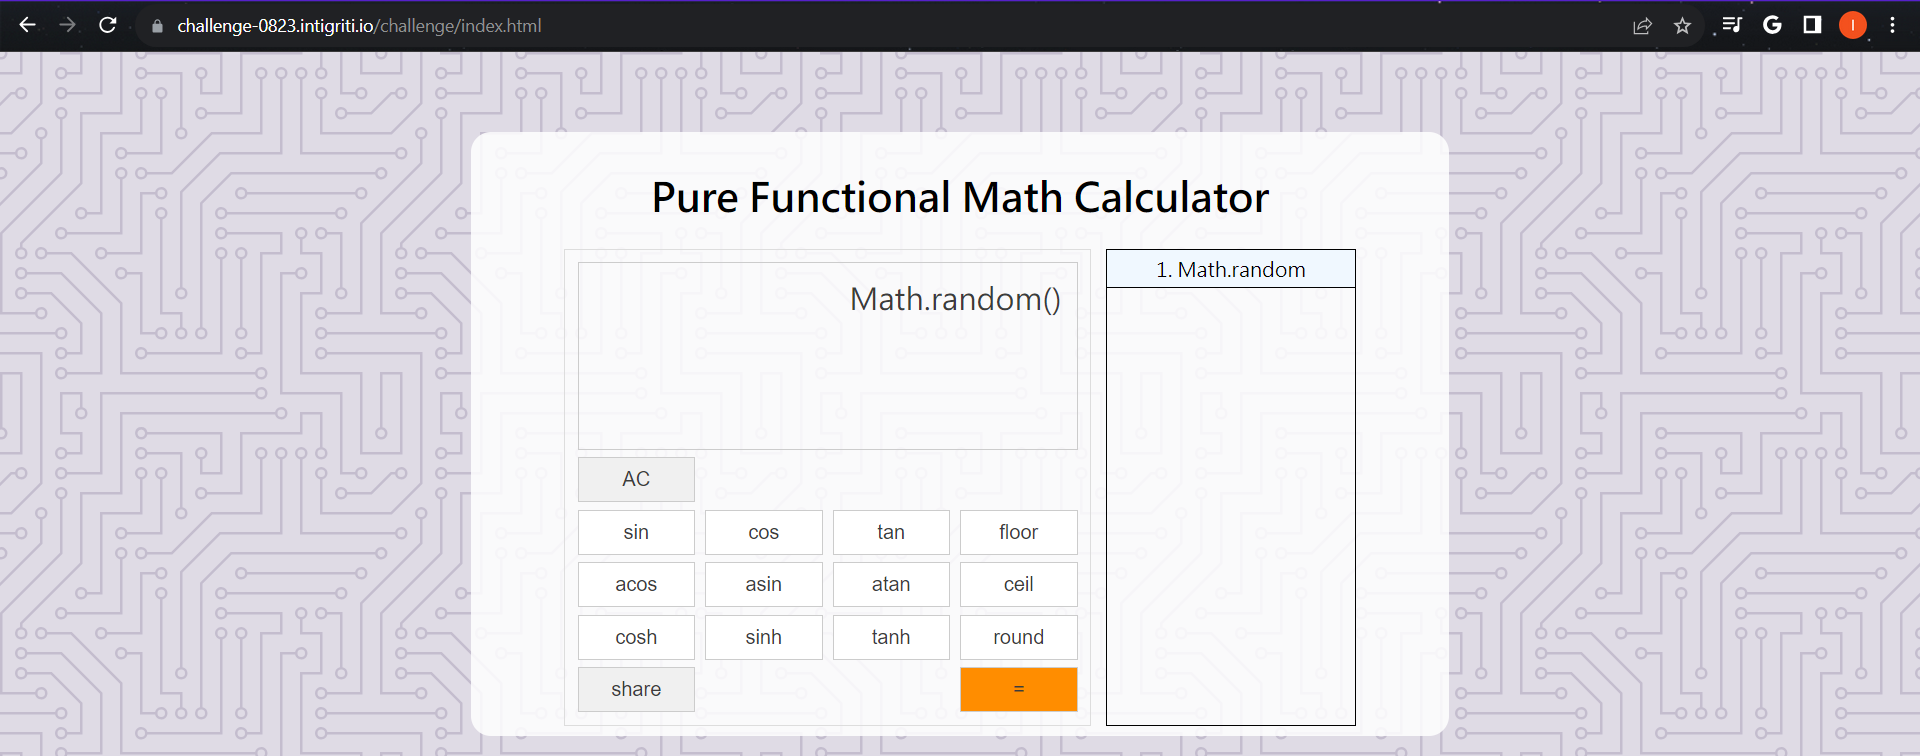 The Pure Functional Math Calculator